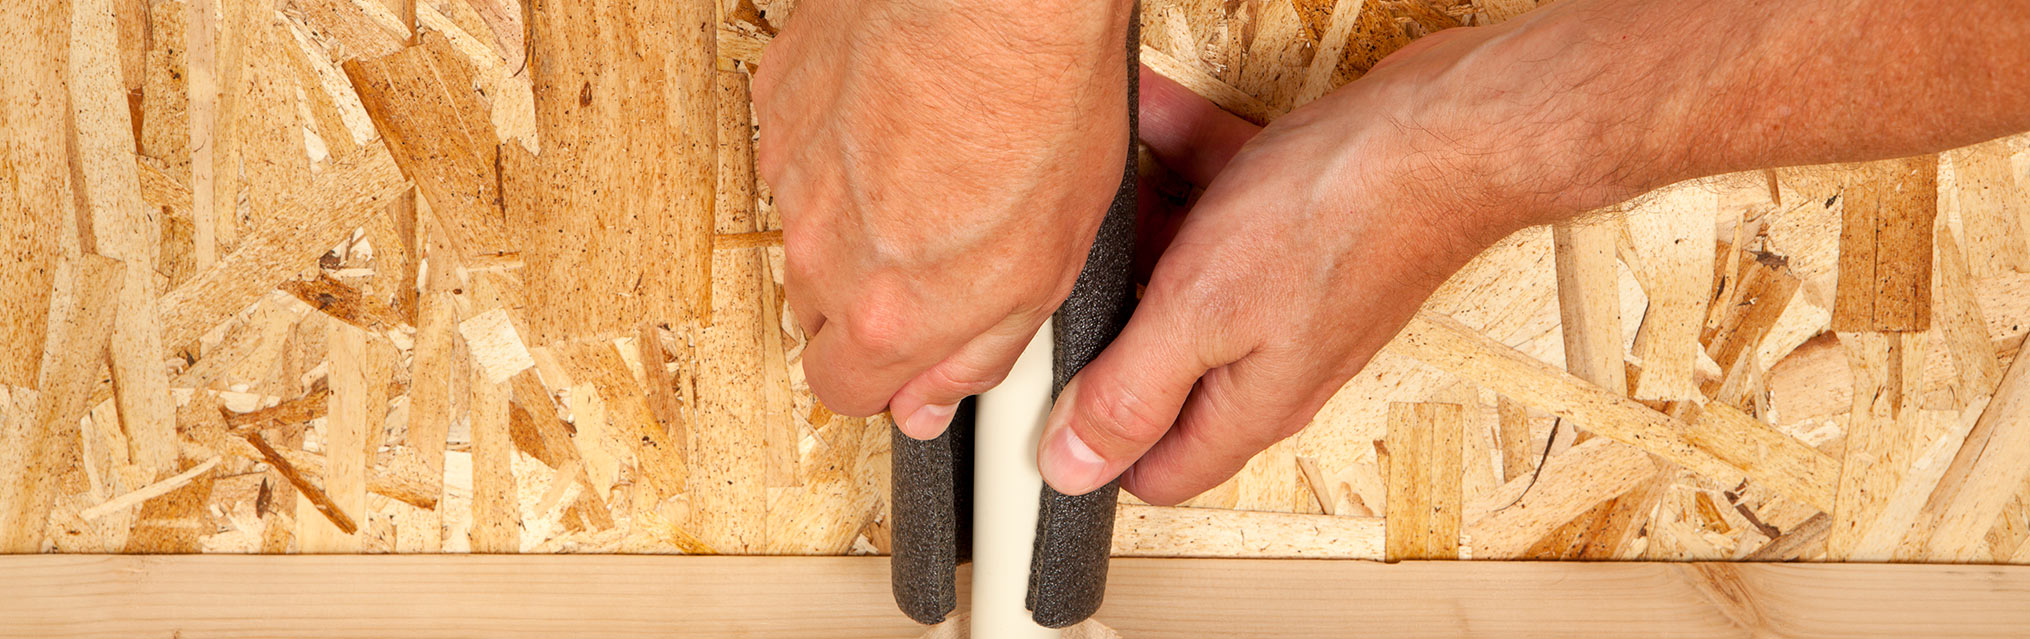 How to insulate hot water pipes
